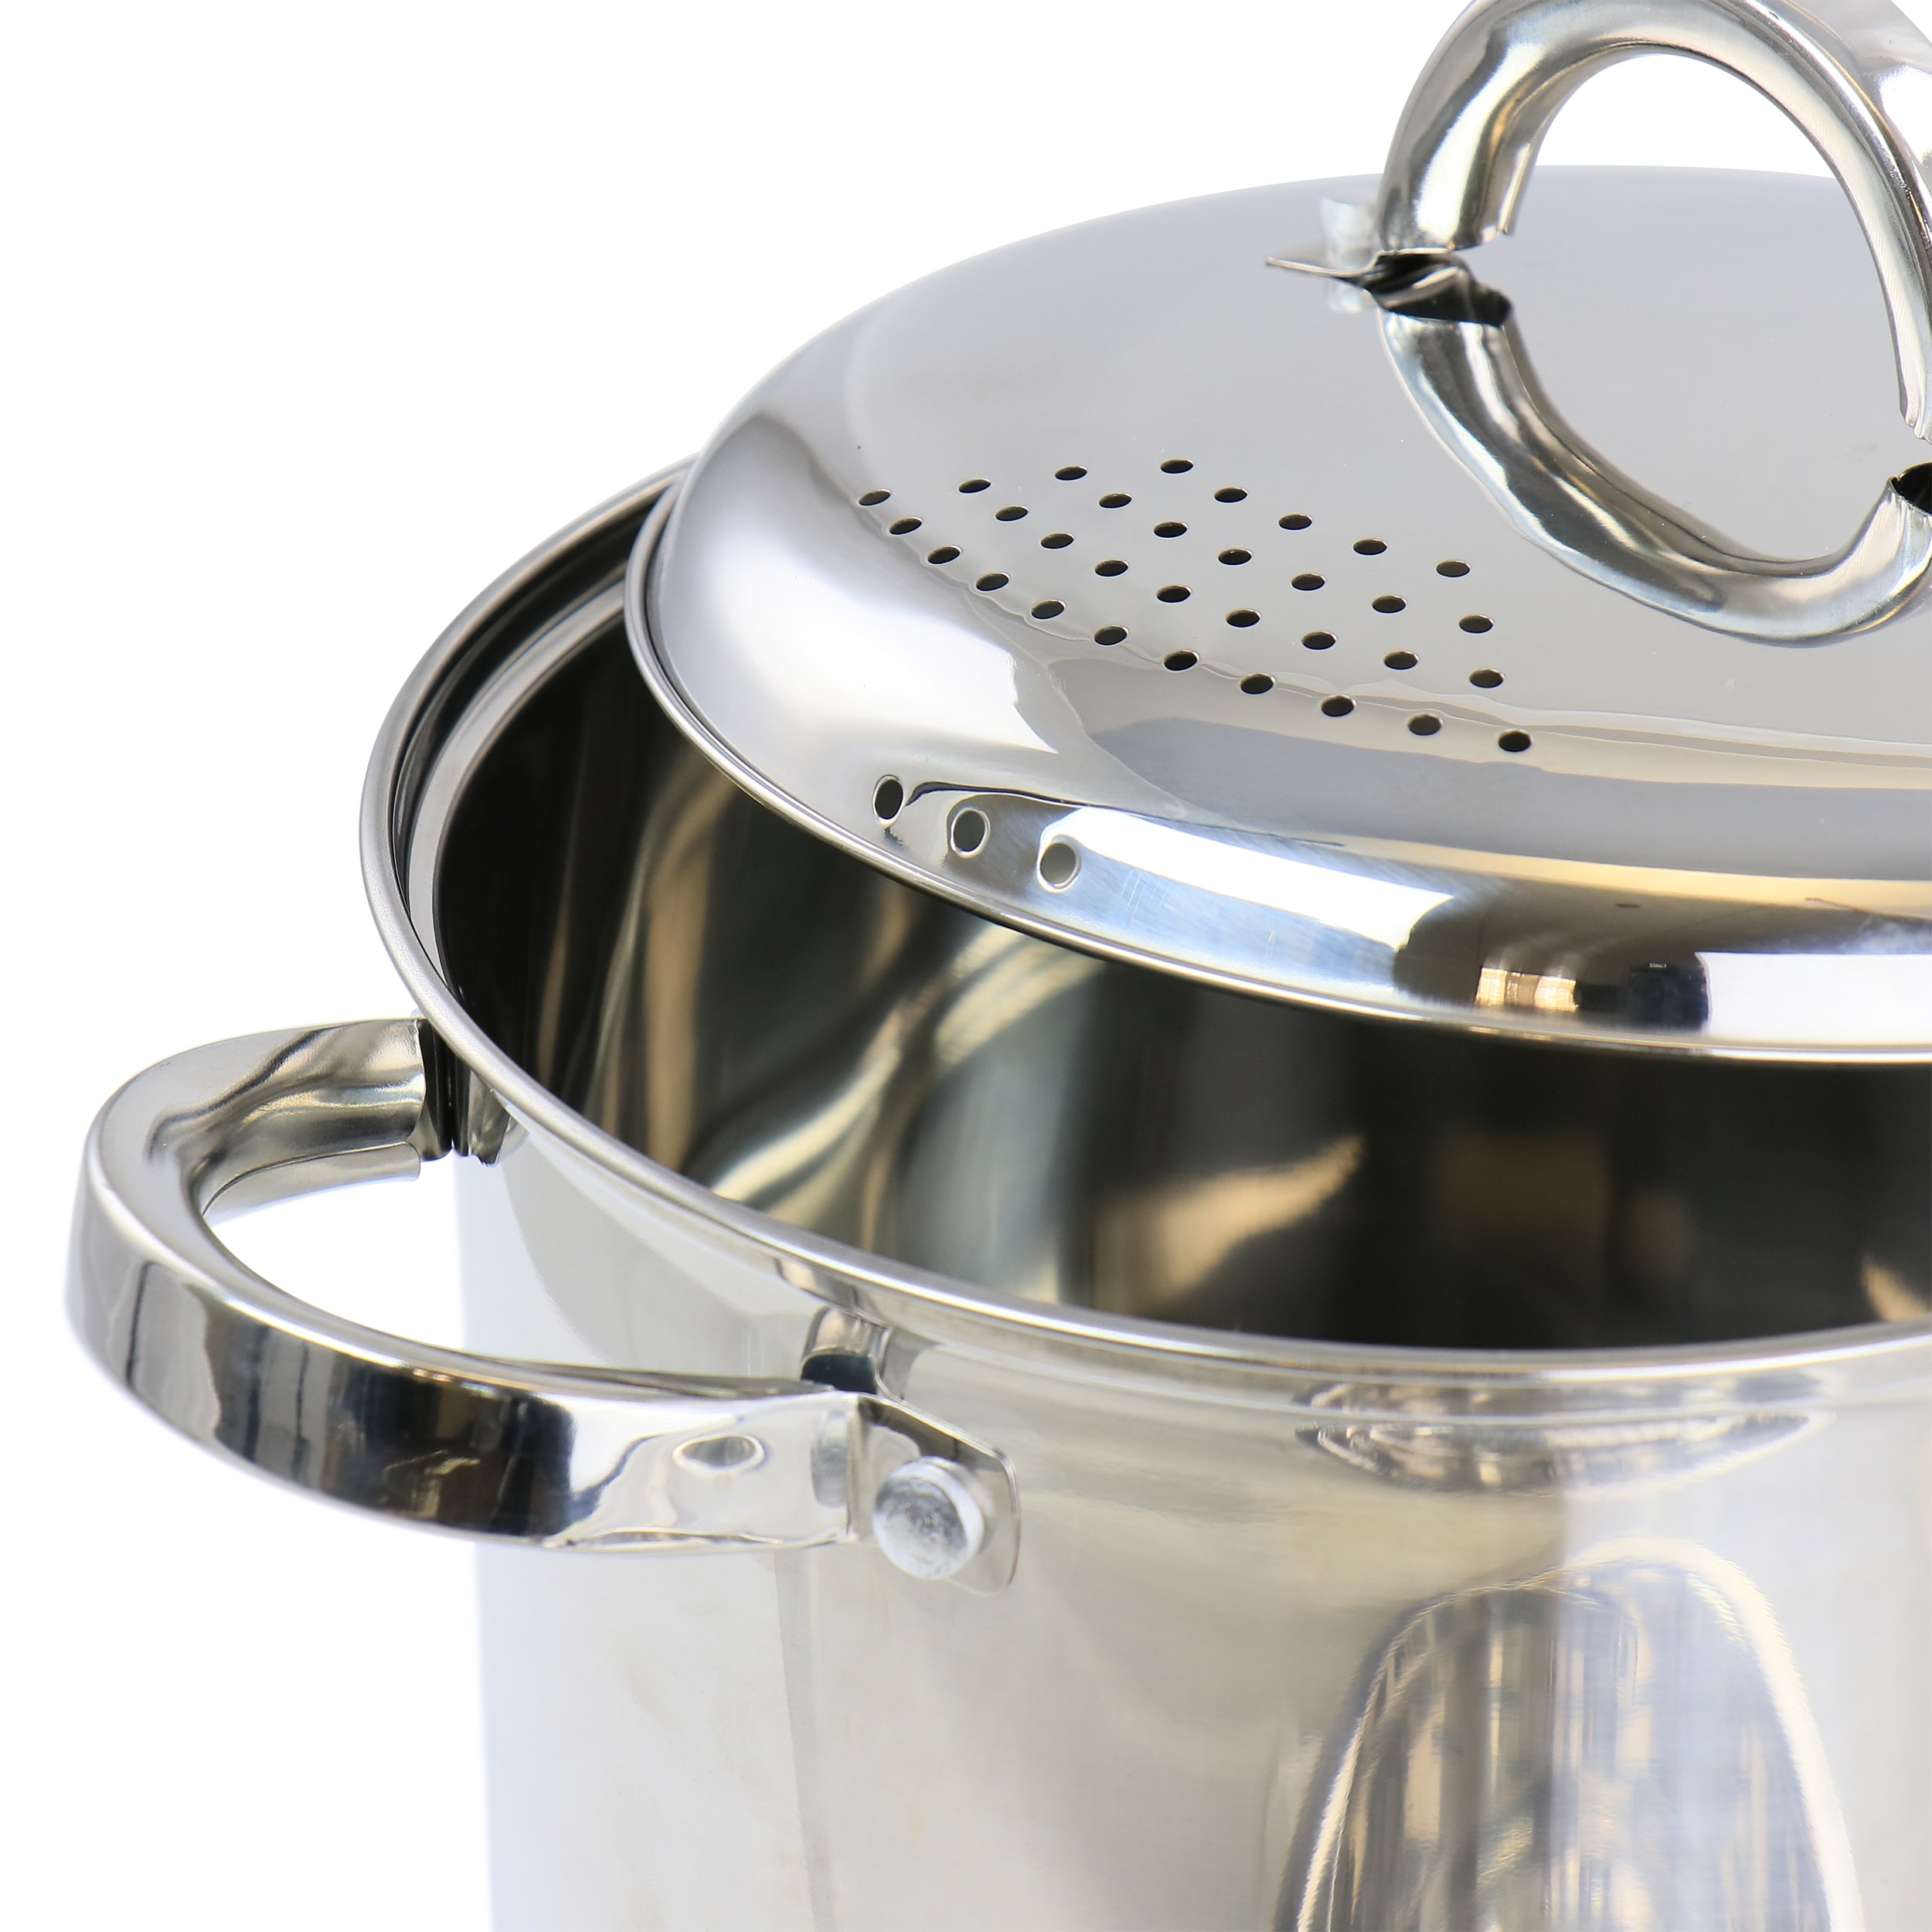 Nutrichef Steamer Insert with Lid - Stainless Steel